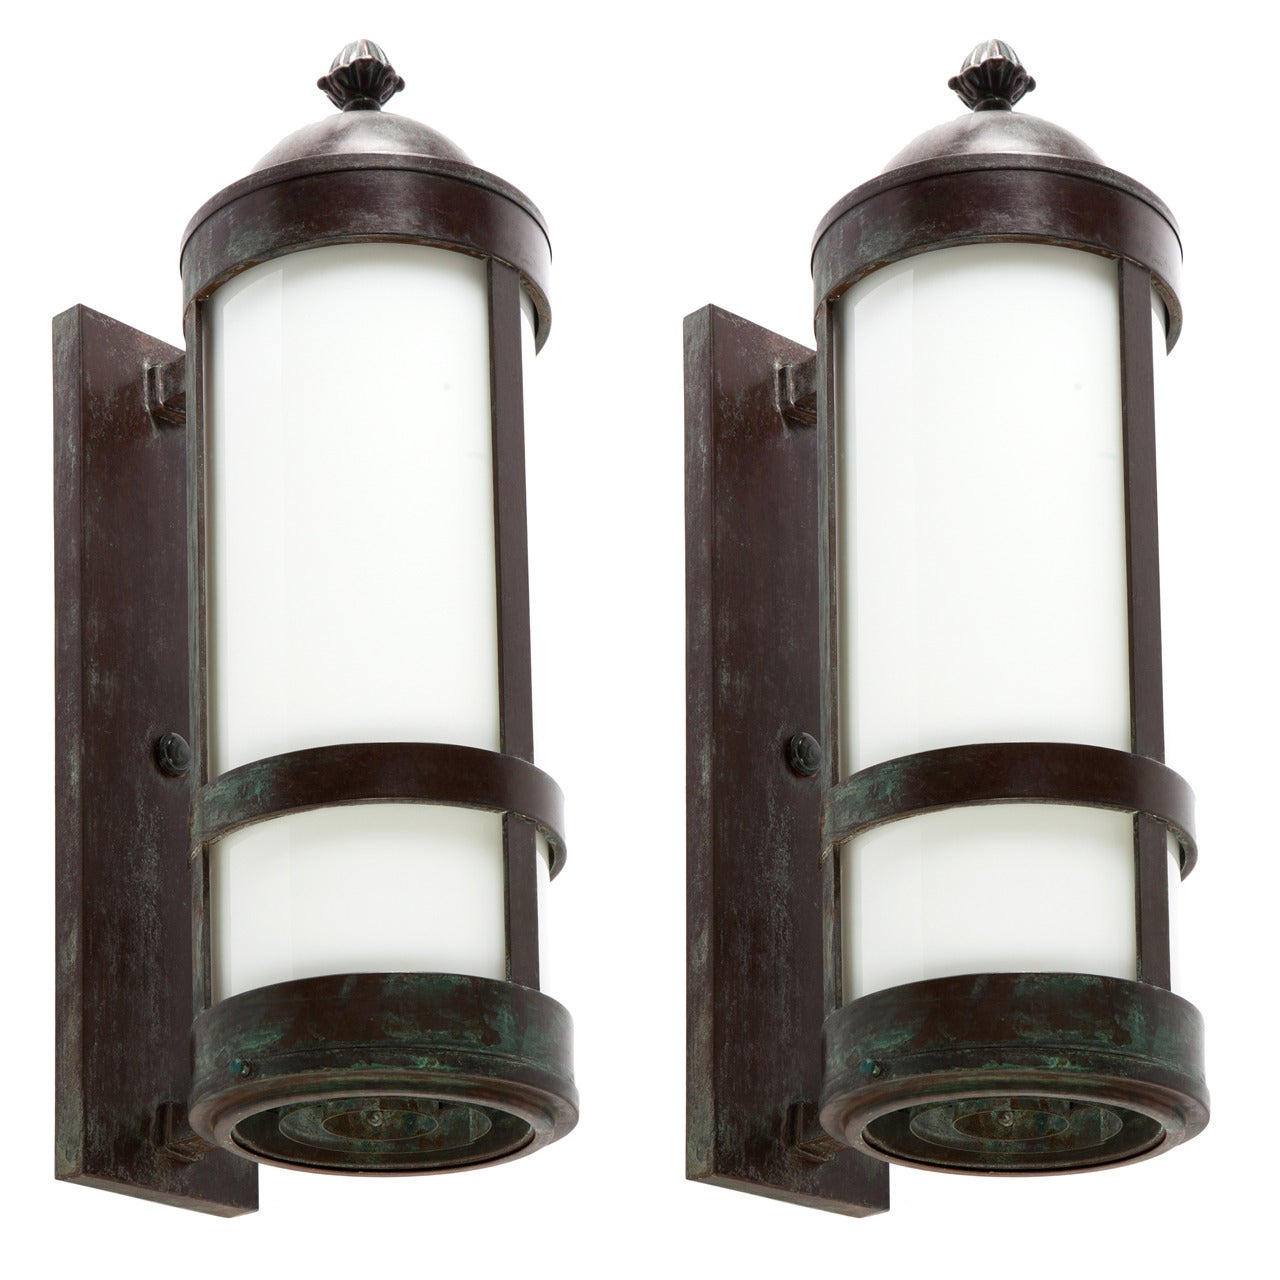 Pair of Cylindrical Wall Lanterns